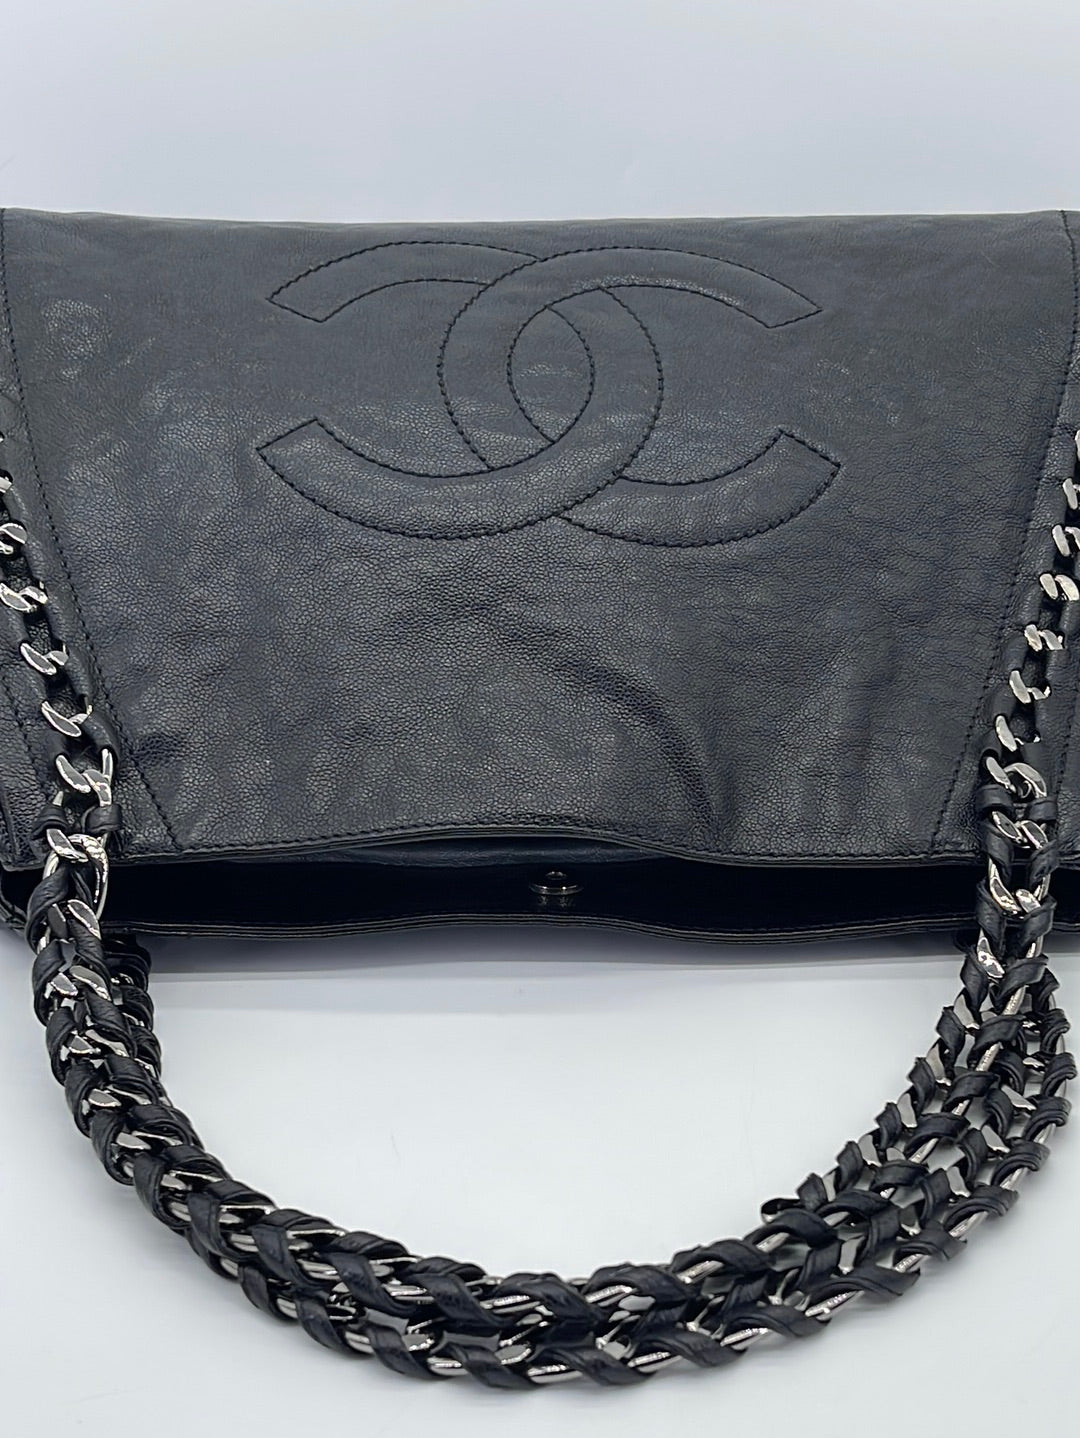 Preloved Chanel Black Glazed Caviar Modern East West Chain Tote H3D4BXW 050124 H